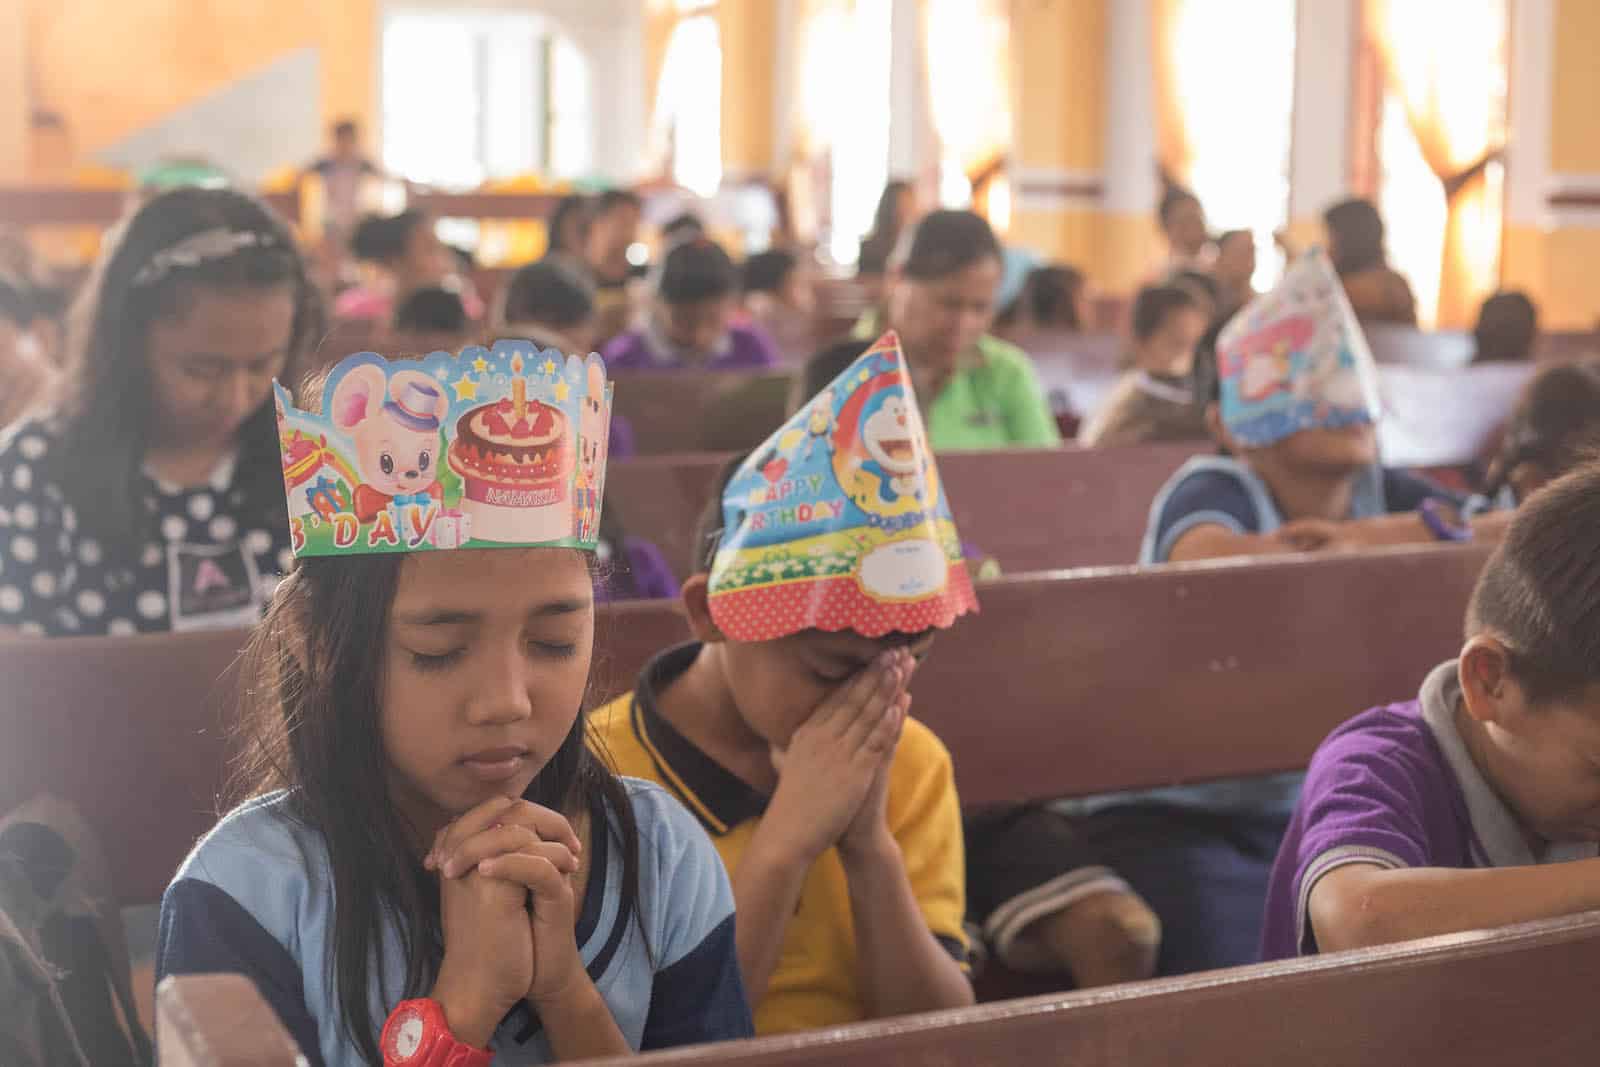 Two children wearing birthday party hats pray, sitting in pews in a church.